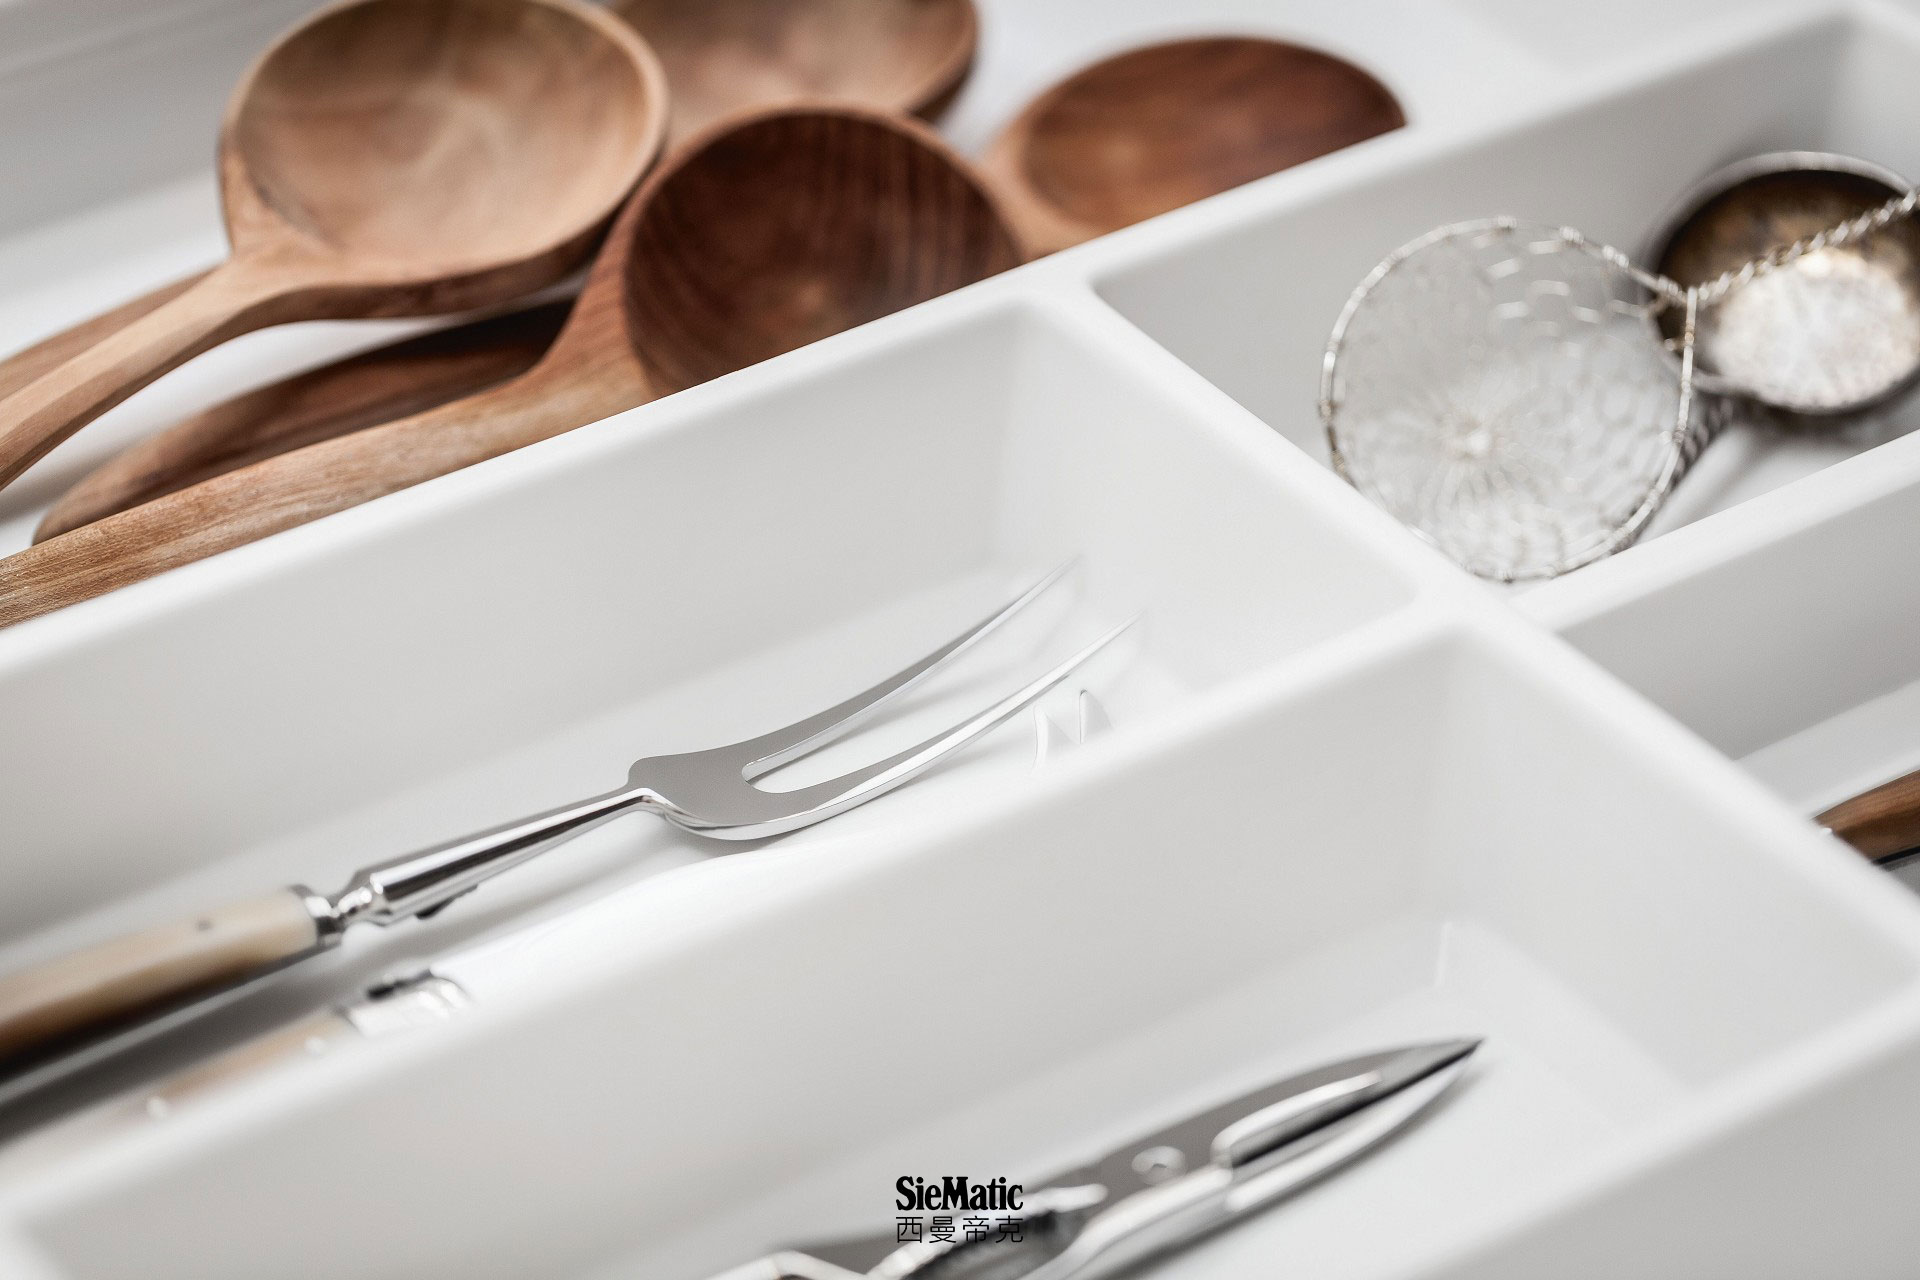 SieMatic kitchen accessories in matte white made with easy-to-care-for laminate for drawers